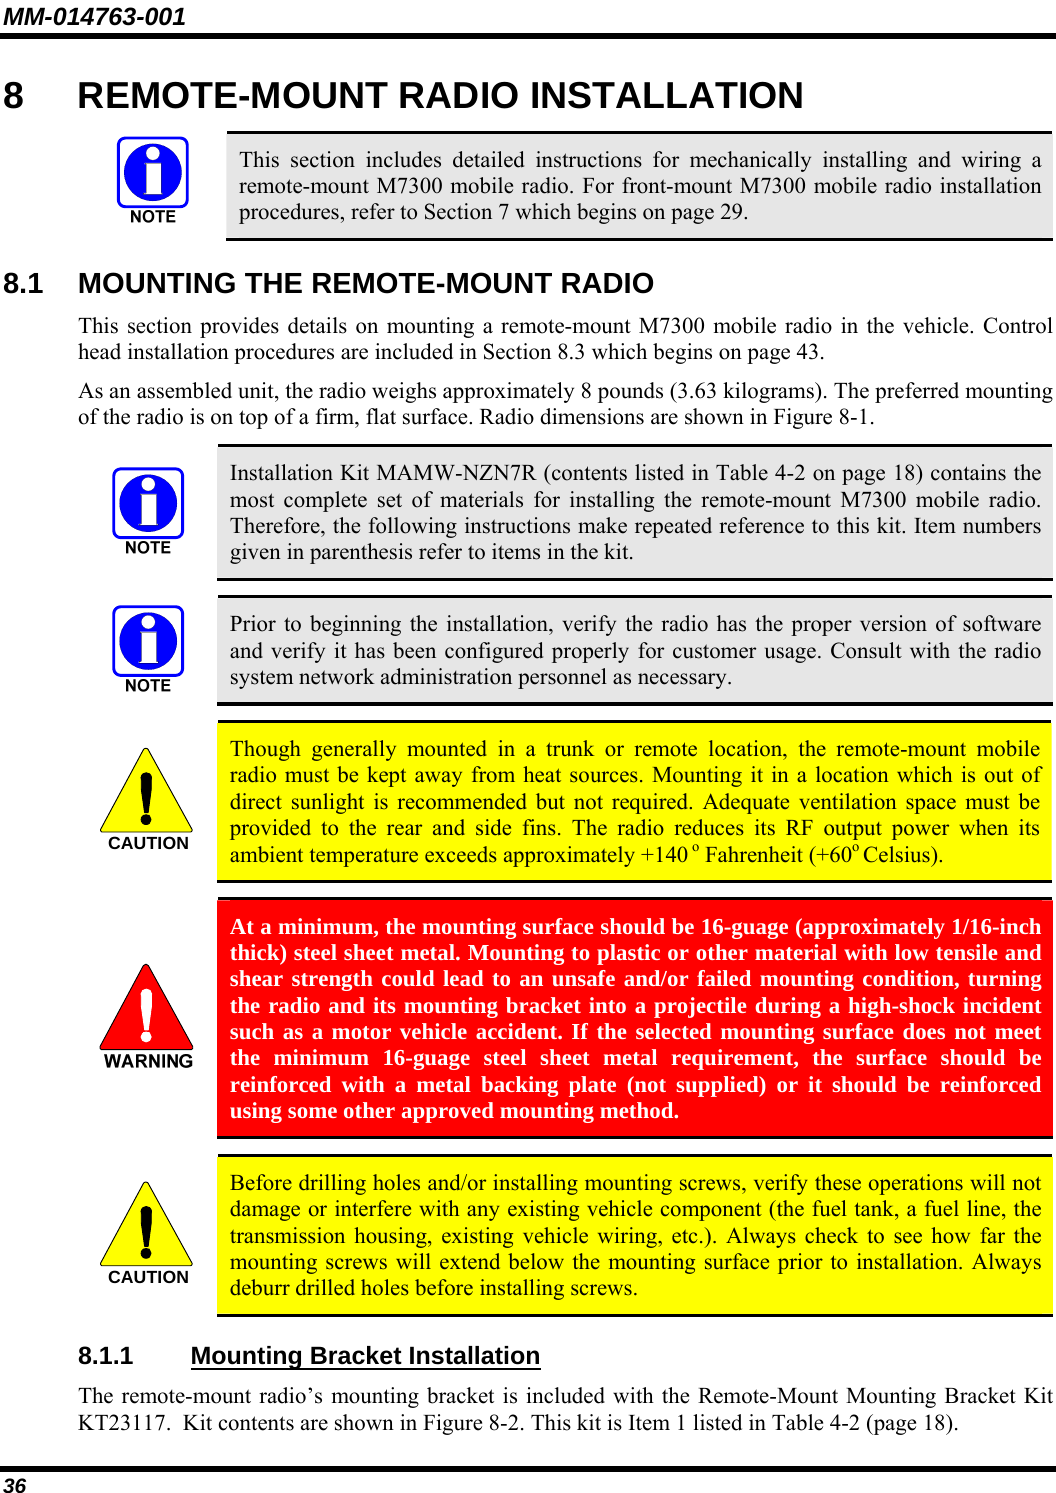 MM-014763-001 36 8  REMOTE-MOUNT RADIO INSTALLATION   This section includes detailed instructions for mechanically installing and wiring a remote-mount M7300 mobile radio. For front-mount M7300 mobile radio installation procedures, refer to Section 7 which begins on page 29. 8.1  MOUNTING THE REMOTE-MOUNT RADIO This section provides details on mounting a remote-mount M7300 mobile radio in the vehicle. Control head installation procedures are included in Section 8.3 which begins on page 43. As an assembled unit, the radio weighs approximately 8 pounds (3.63 kilograms). The preferred mounting of the radio is on top of a firm, flat surface. Radio dimensions are shown in Figure 8-1.   Installation Kit MAMW-NZN7R (contents listed in Table 4-2 on page 18) contains the most complete set of materials for installing the remote-mount M7300 mobile radio. Therefore, the following instructions make repeated reference to this kit. Item numbers given in parenthesis refer to items in the kit.   Prior to beginning the installation, verify the radio has the proper version of software and verify it has been configured properly for customer usage. Consult with the radio system network administration personnel as necessary.  CAUTION  Though generally mounted in a trunk or remote location, the remote-mount mobile radio must be kept away from heat sources. Mounting it in a location which is out of direct sunlight is recommended but not required. Adequate ventilation space must be provided to the rear and side fins. The radio reduces its RF output power when its ambient temperature exceeds approximately +140 o Fahrenheit (+60o Celsius).   At a minimum, the mounting surface should be 16-guage (approximately 1/16-inch thick) steel sheet metal. Mounting to plastic or other material with low tensile and shear strength could lead to an unsafe and/or failed mounting condition, turning the radio and its mounting bracket into a projectile during a high-shock incident such as a motor vehicle accident. If the selected mounting surface does not meet the minimum 16-guage steel sheet metal requirement, the surface should be reinforced with a metal backing plate (not supplied) or it should be reinforced using some other approved mounting method.  CAUTION  Before drilling holes and/or installing mounting screws, verify these operations will not damage or interfere with any existing vehicle component (the fuel tank, a fuel line, the transmission housing, existing vehicle wiring, etc.). Always check to see how far the mounting screws will extend below the mounting surface prior to installation. Always deburr drilled holes before installing screws. 8.1.1 Mounting Bracket Installation The remote-mount radio’s mounting bracket is included with the Remote-Mount Mounting Bracket Kit KT23117.  Kit contents are shown in Figure 8-2. This kit is Item 1 listed in Table 4-2 (page 18). 